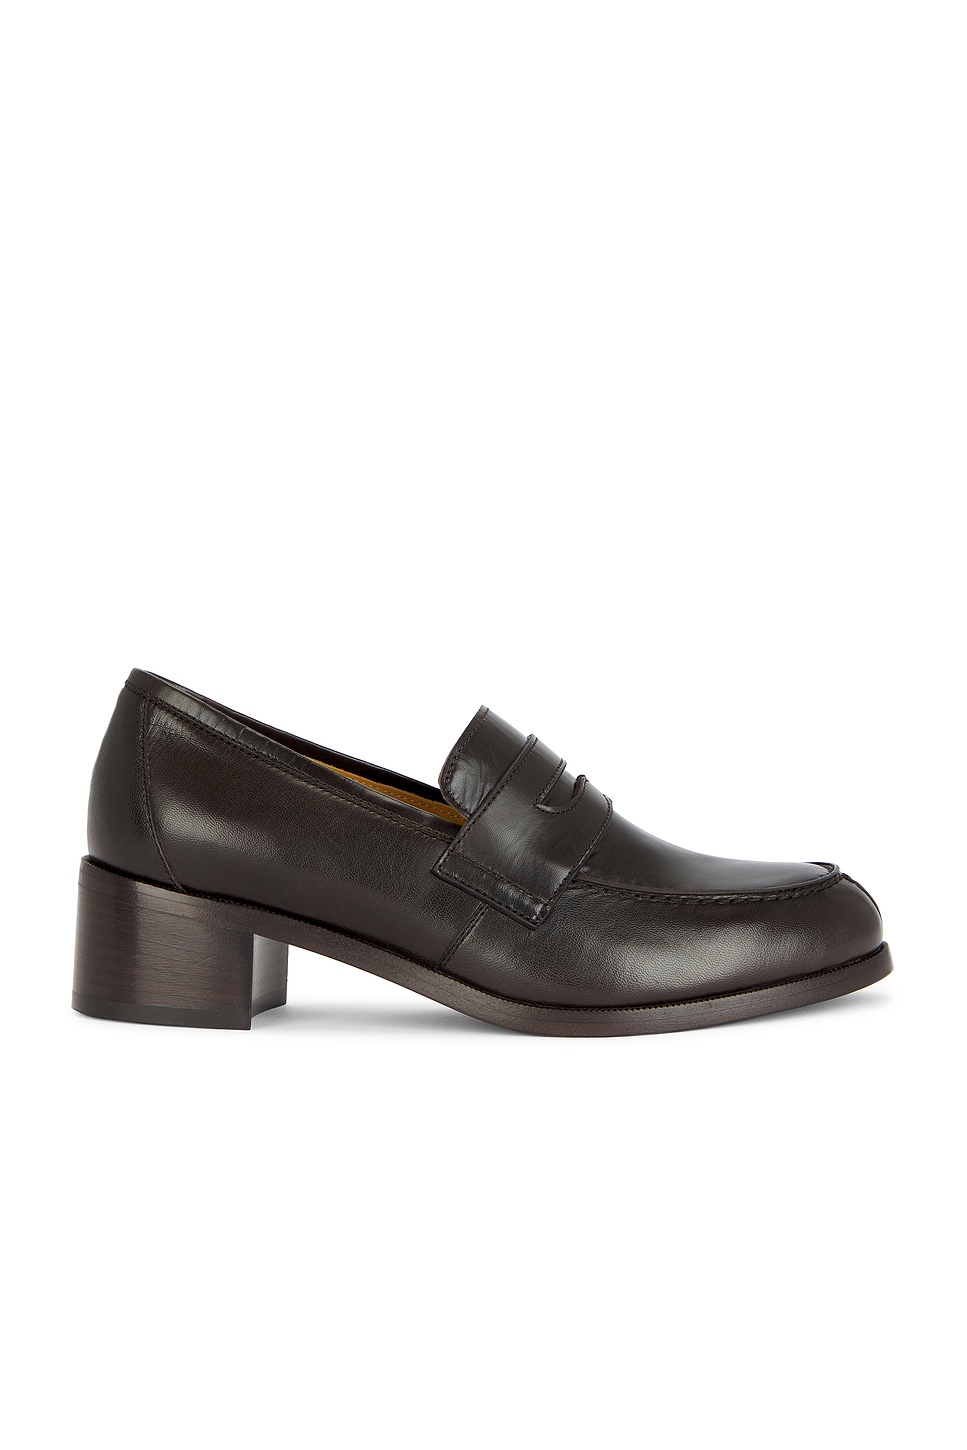 Image 1 of The Row Vera Loafer in CHOCOLATE